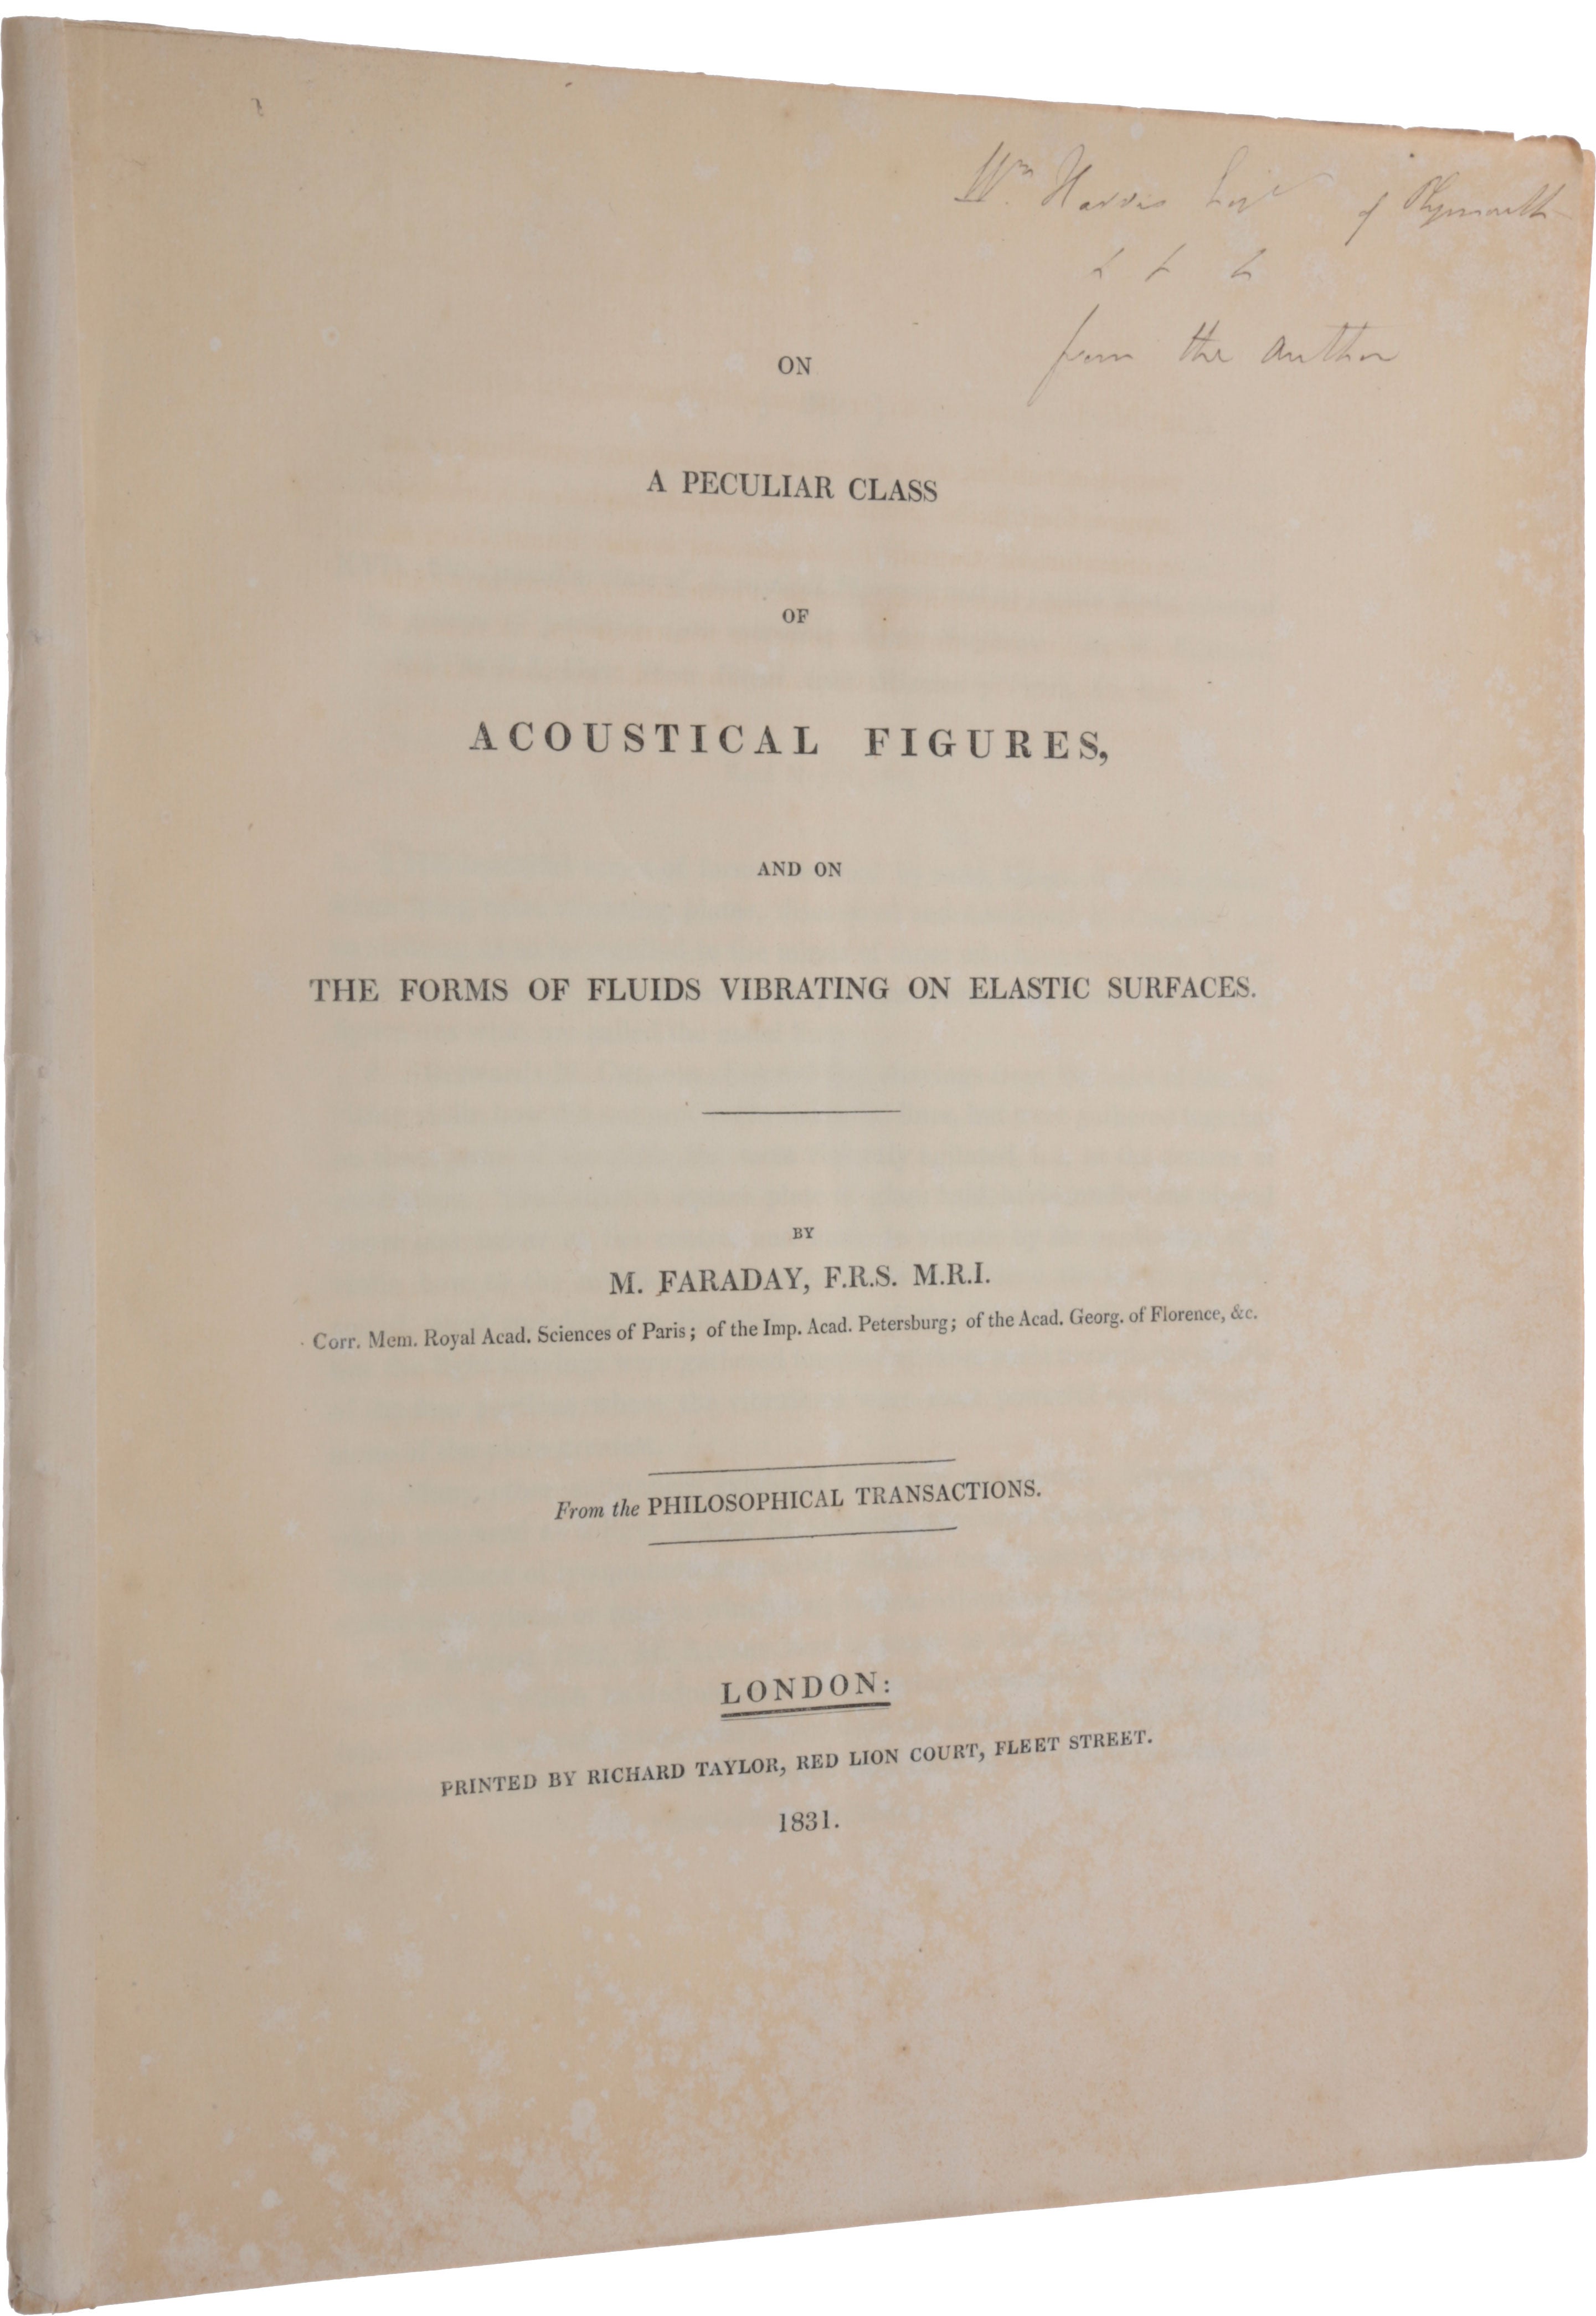 Item #5298 On a peculiar class of acoustical figures and on the forms of fluids vibrating on elastic surfaces. Offprint from: Philosophical Transactions, Vol. 121. Read before the Royal Society May 12, 1831. Michael FARADAY.